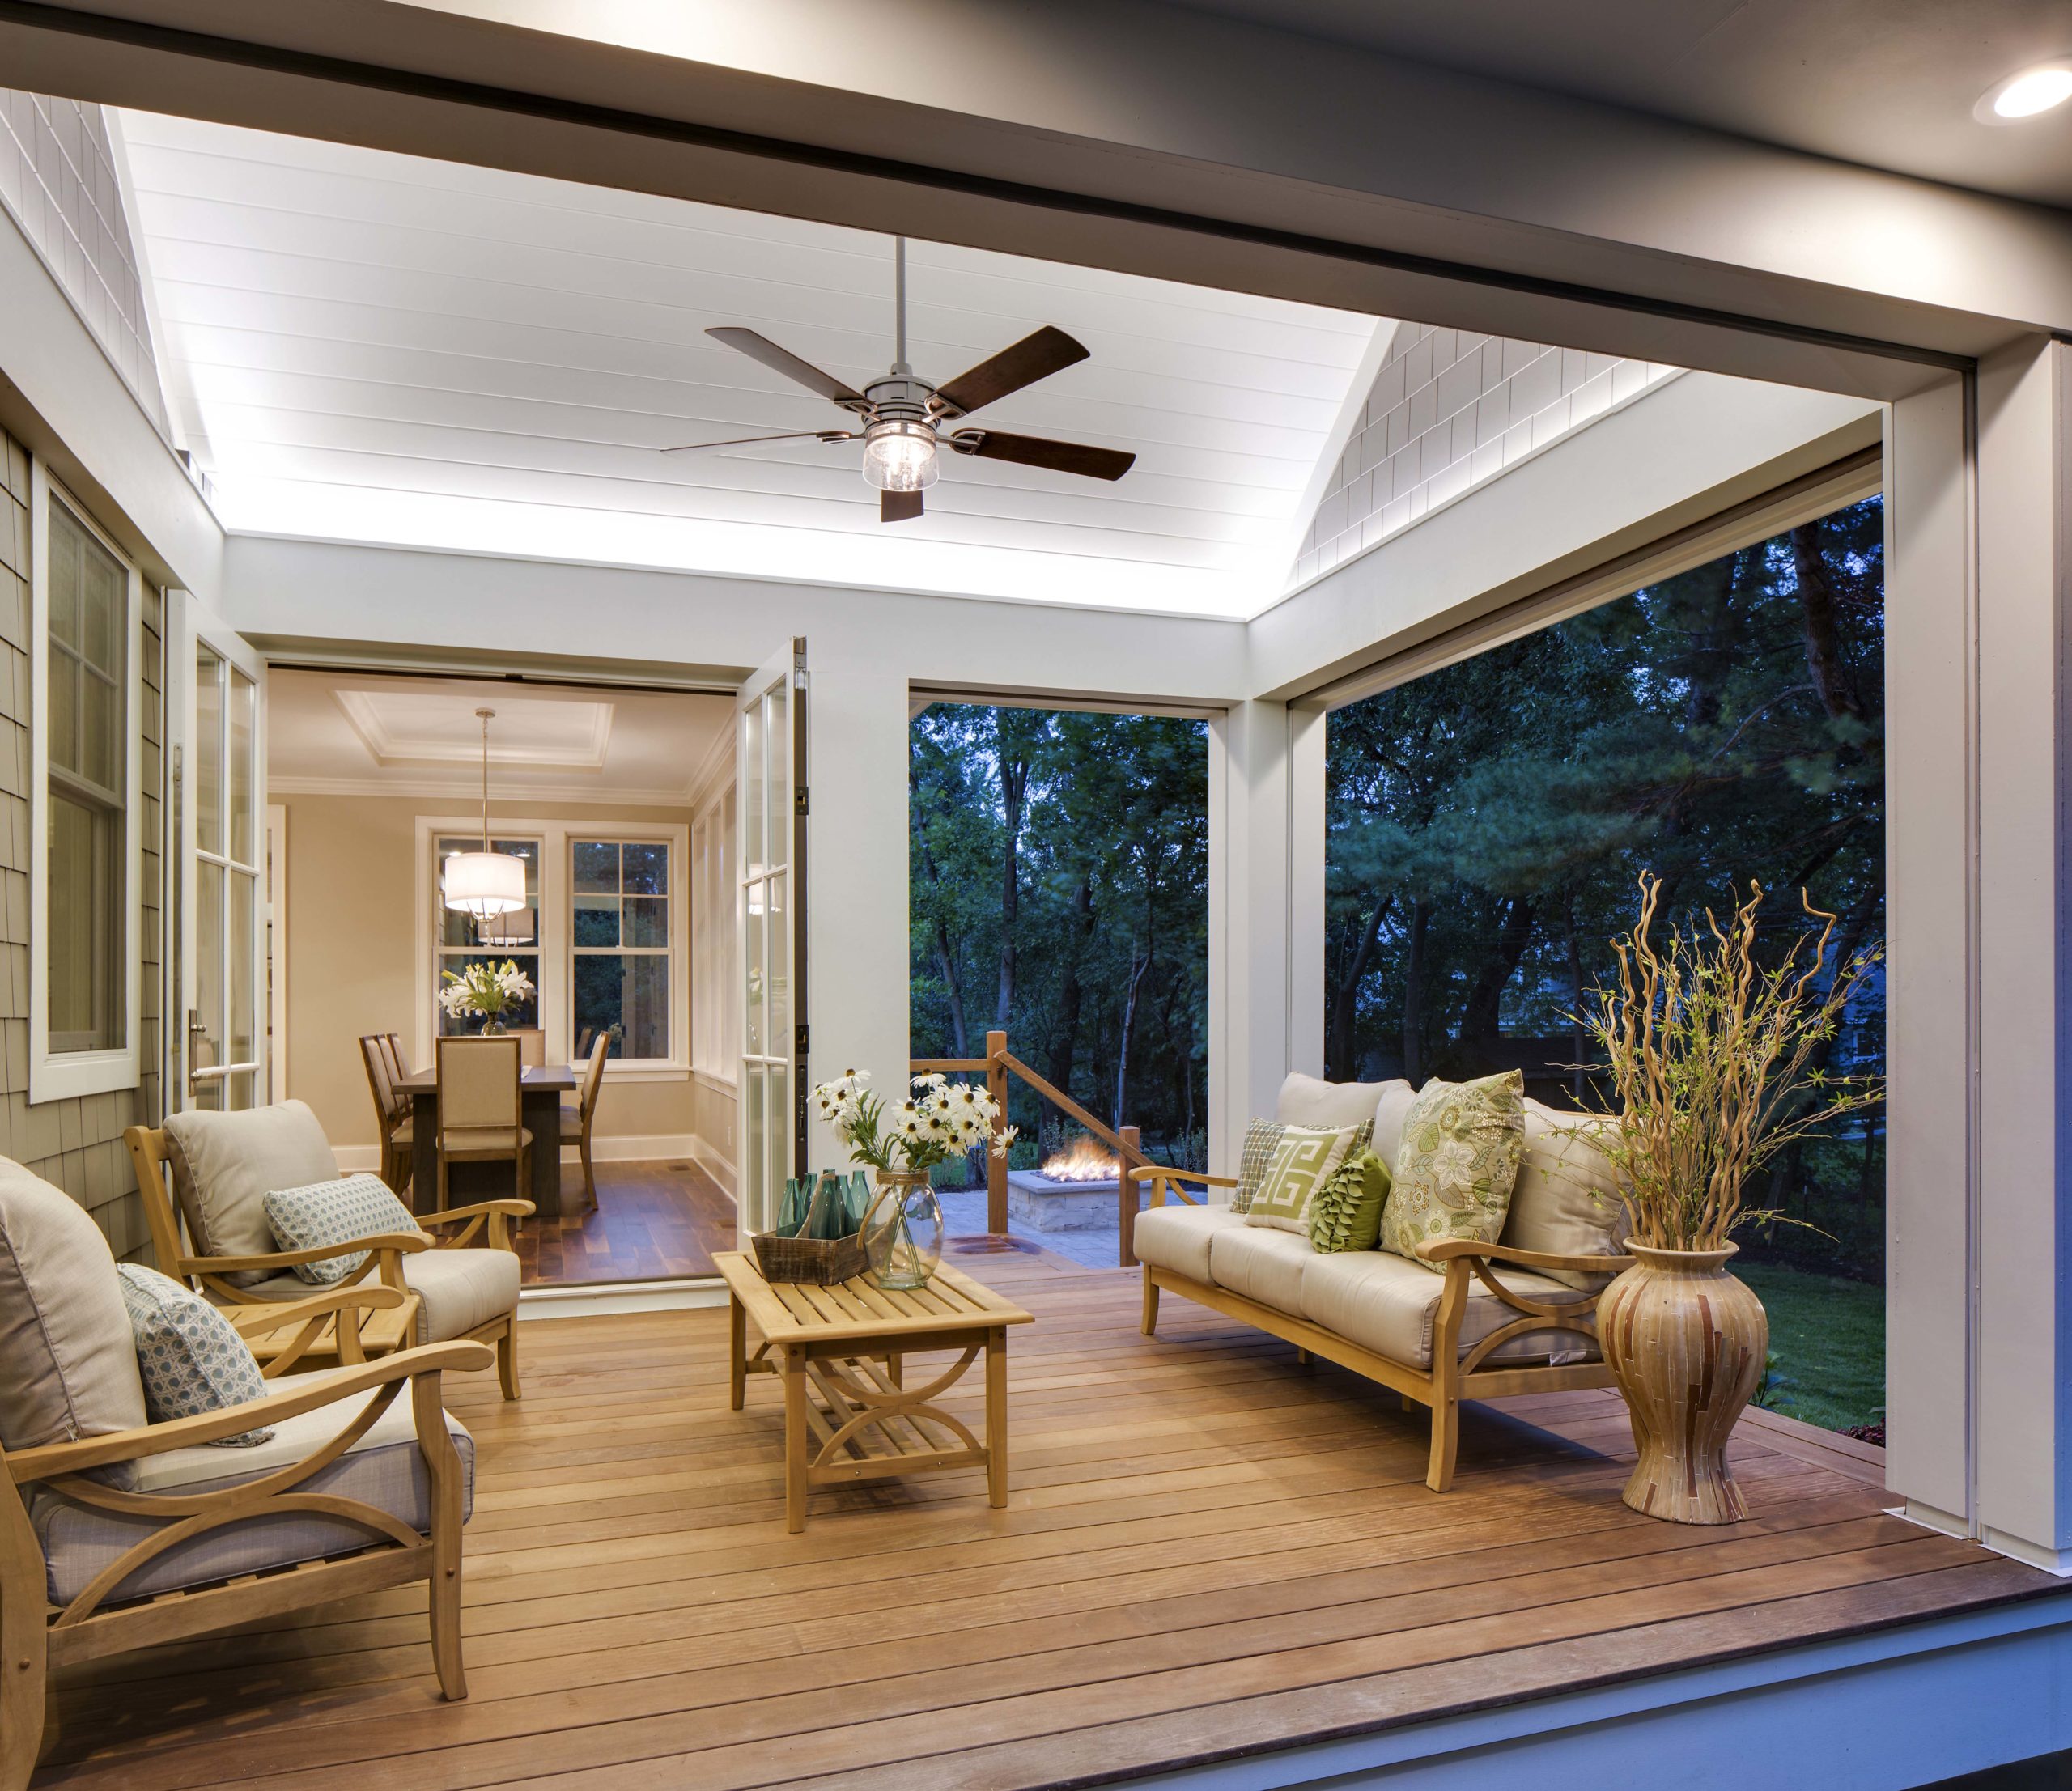 A porch with furniture and a ceiling fan.